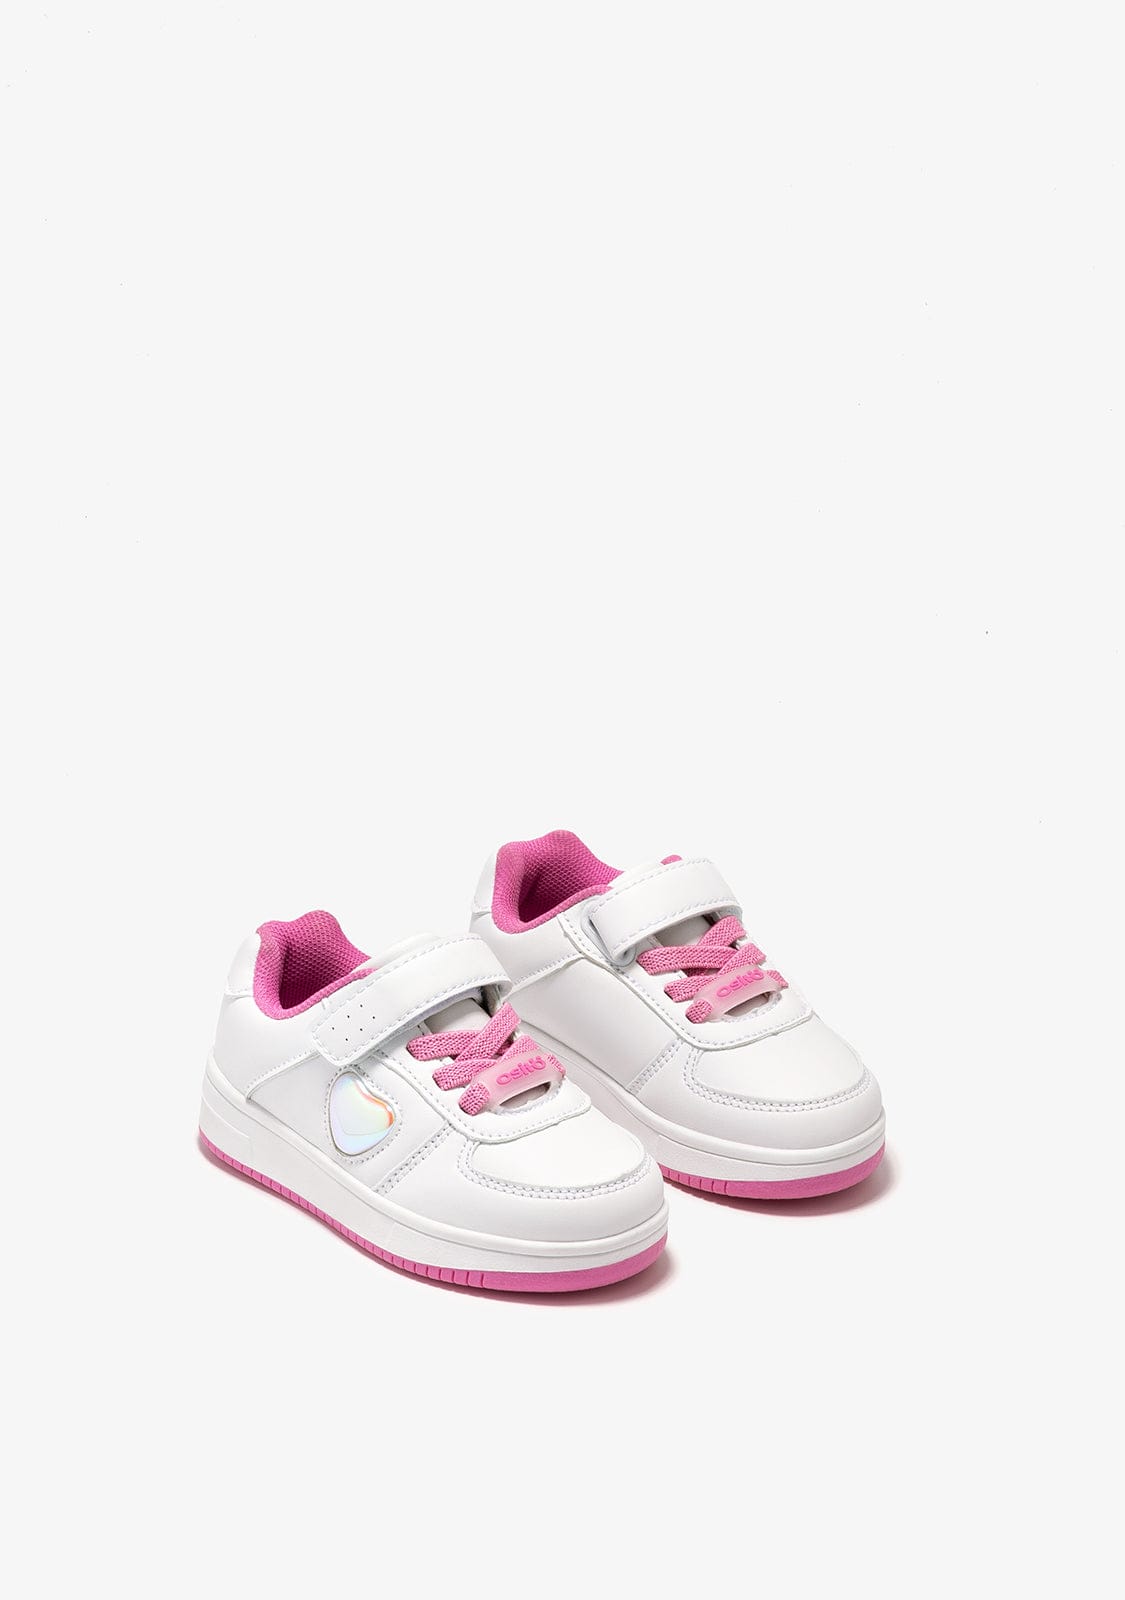 OSITO Shoes Baby's White With Lights Heart Sneakers